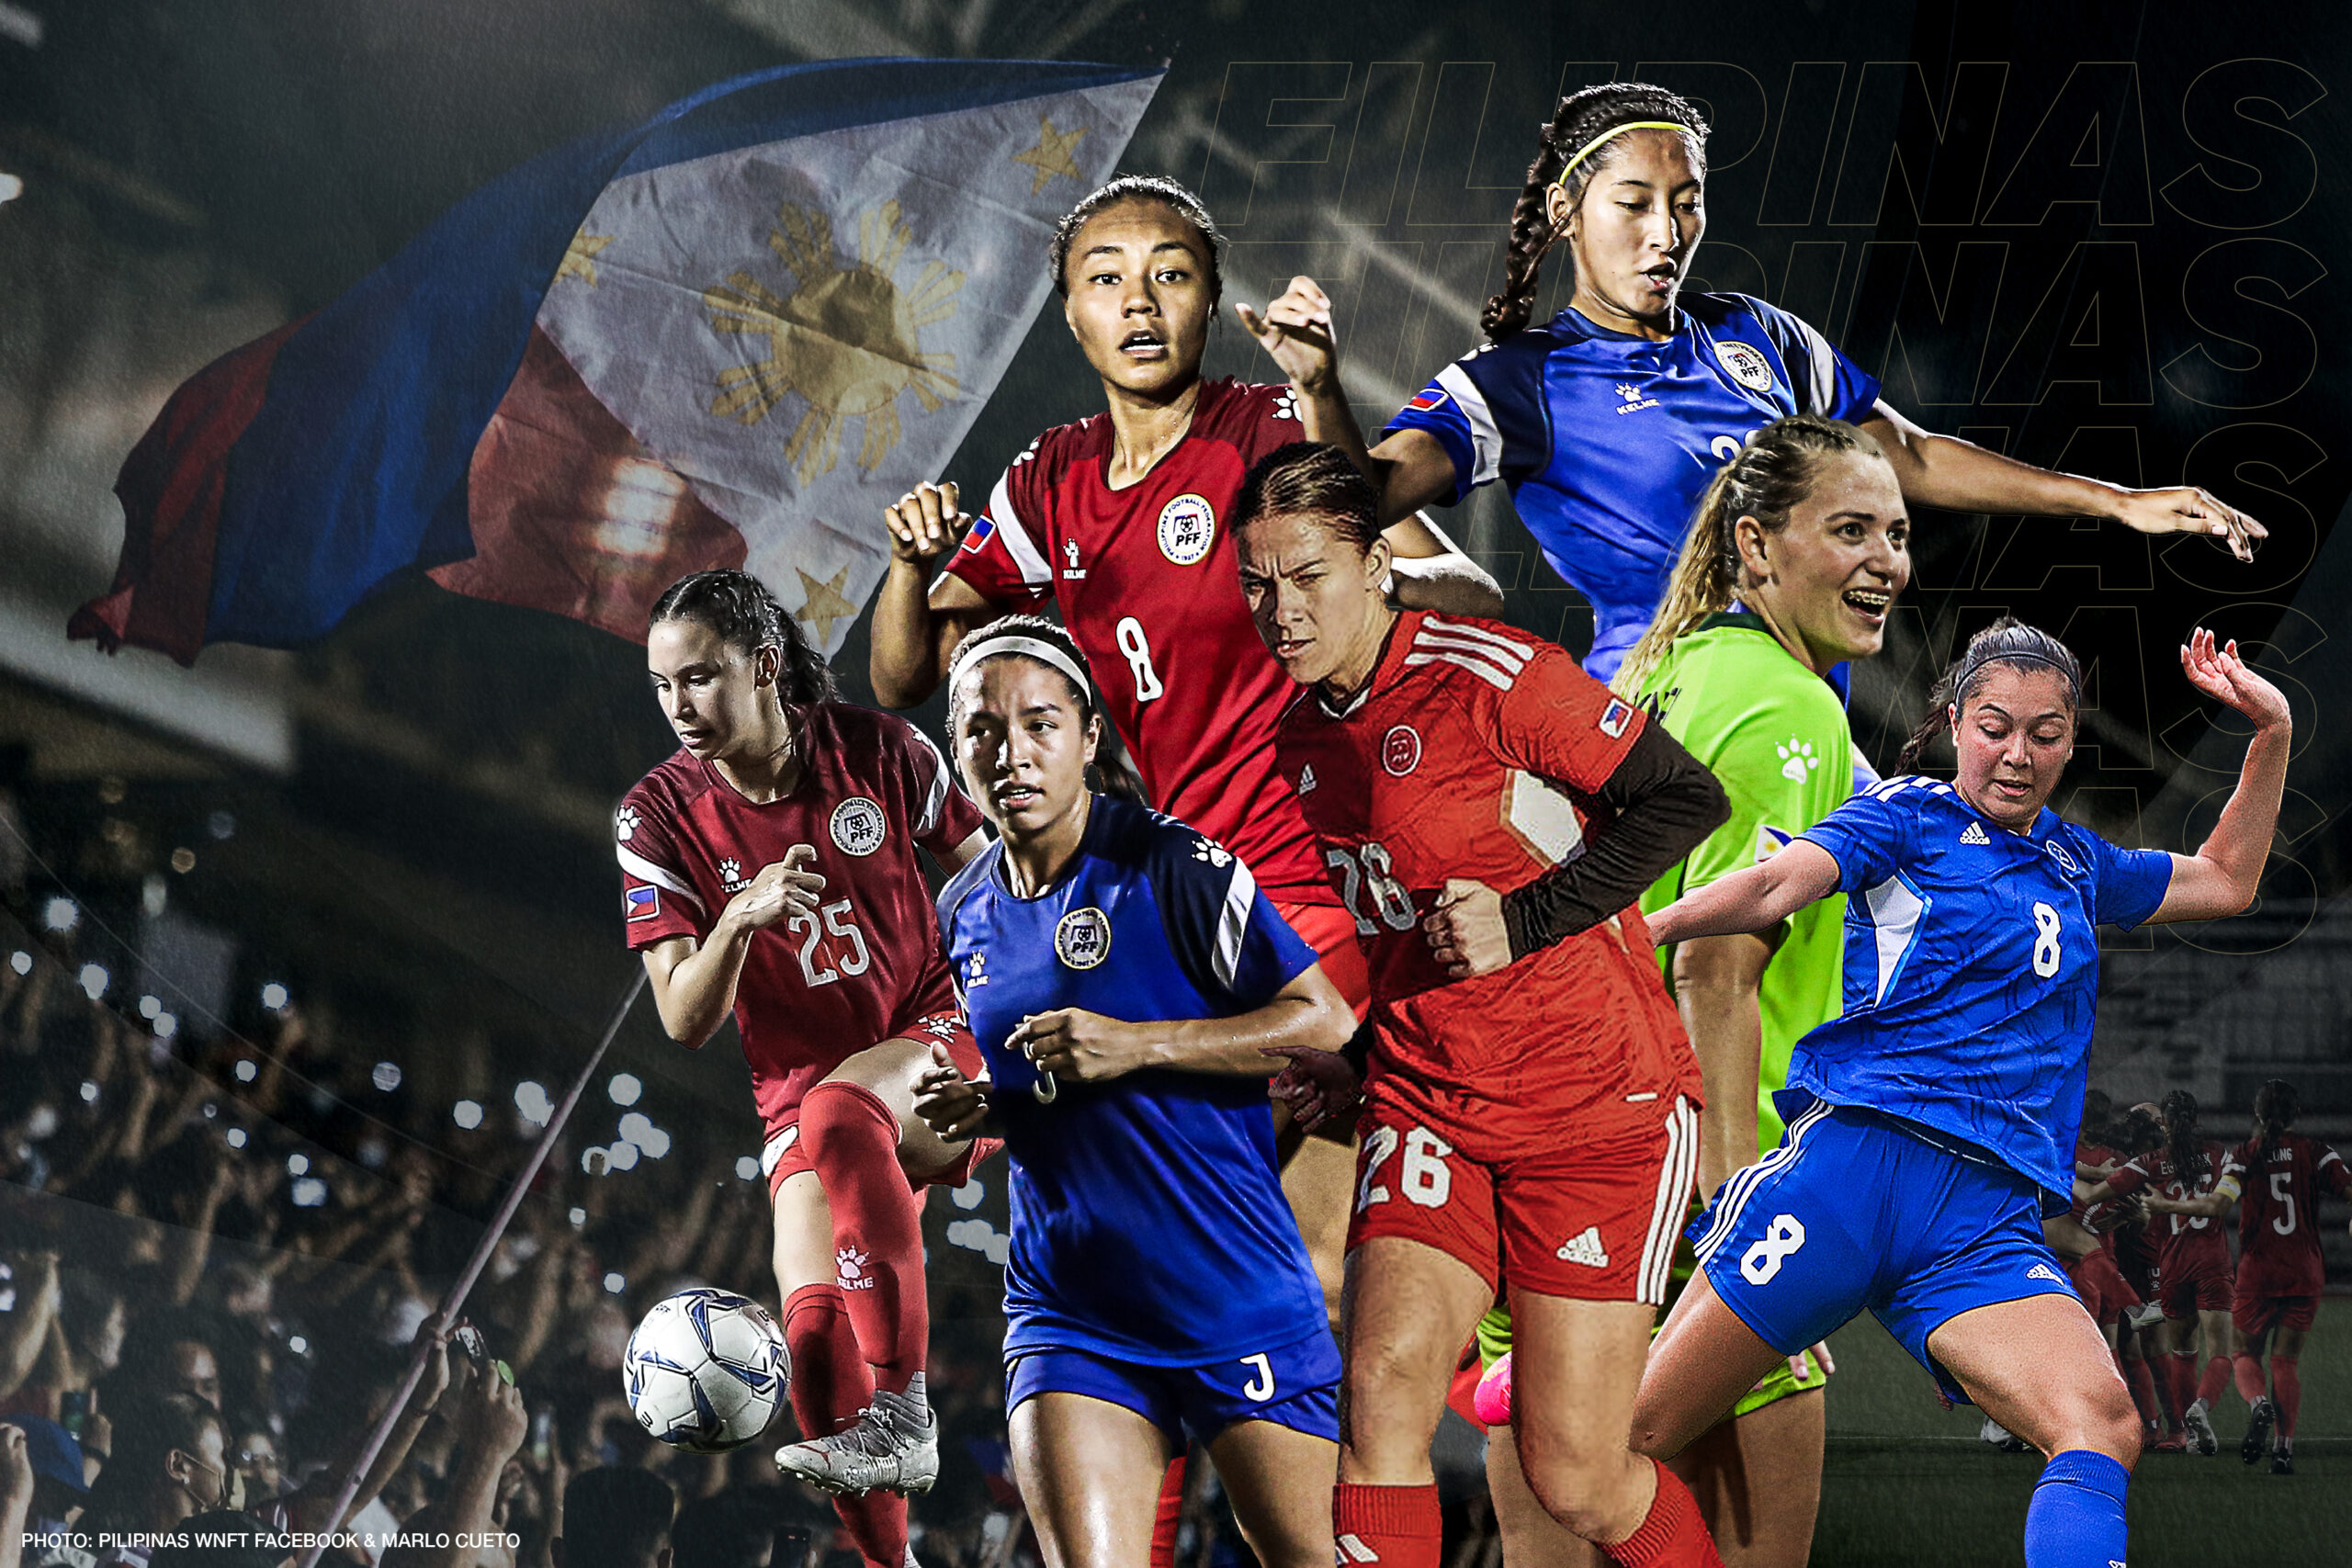 Filipinas Fifa Women's World Cup players to watch